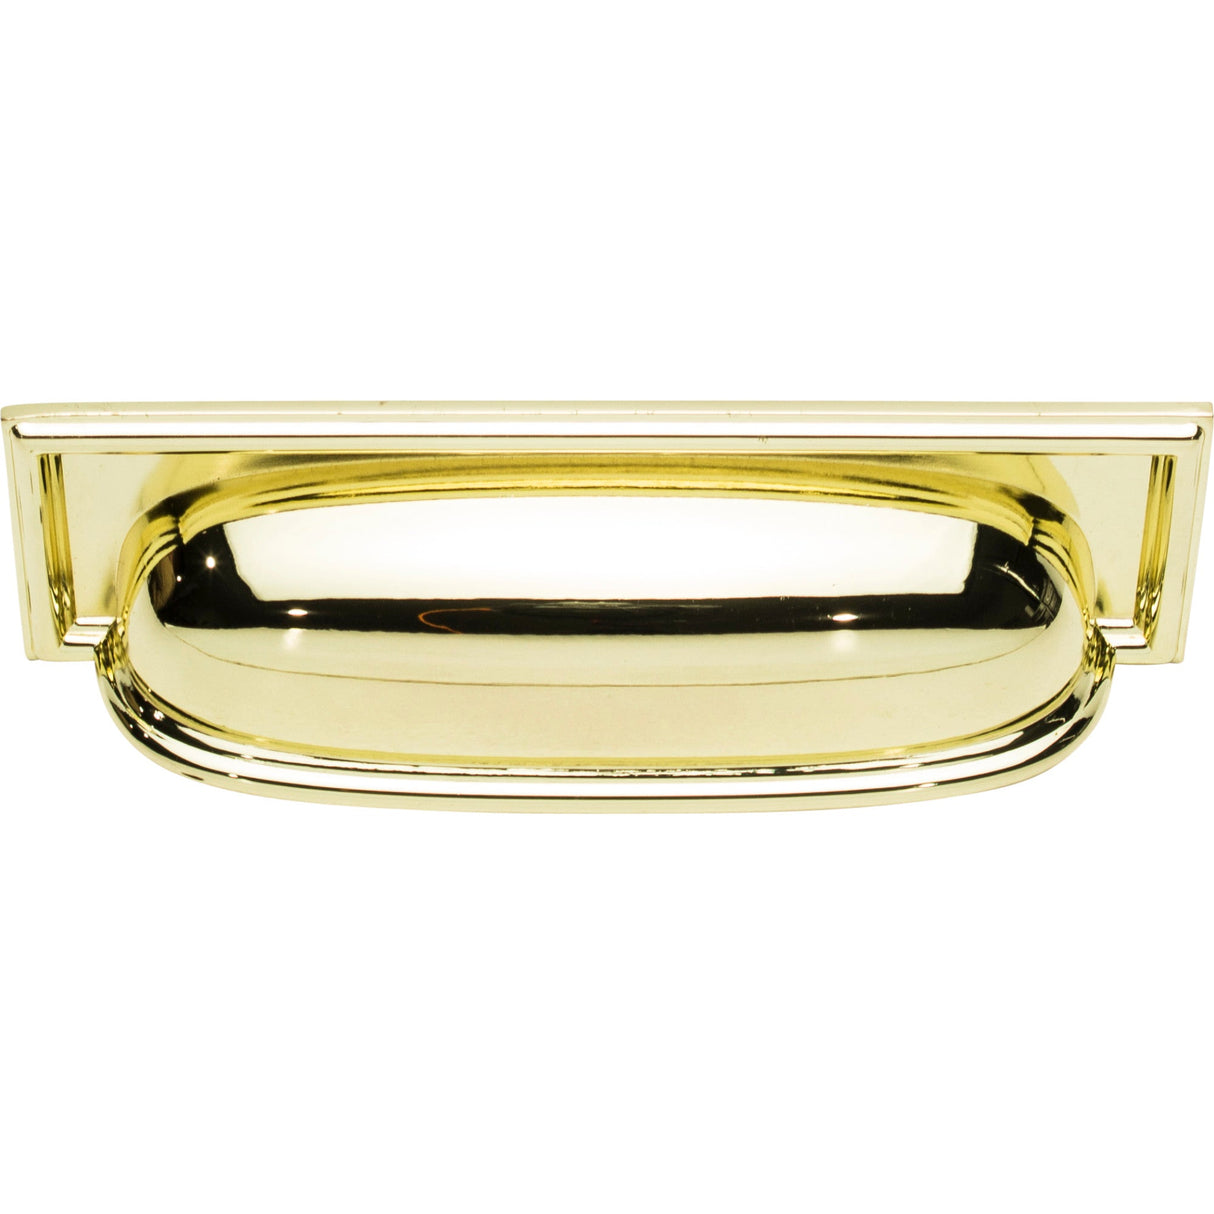 Atlas Homewares Campaign Rope Cup Pull 3 3/4 Inch (c-c) Polished Brass